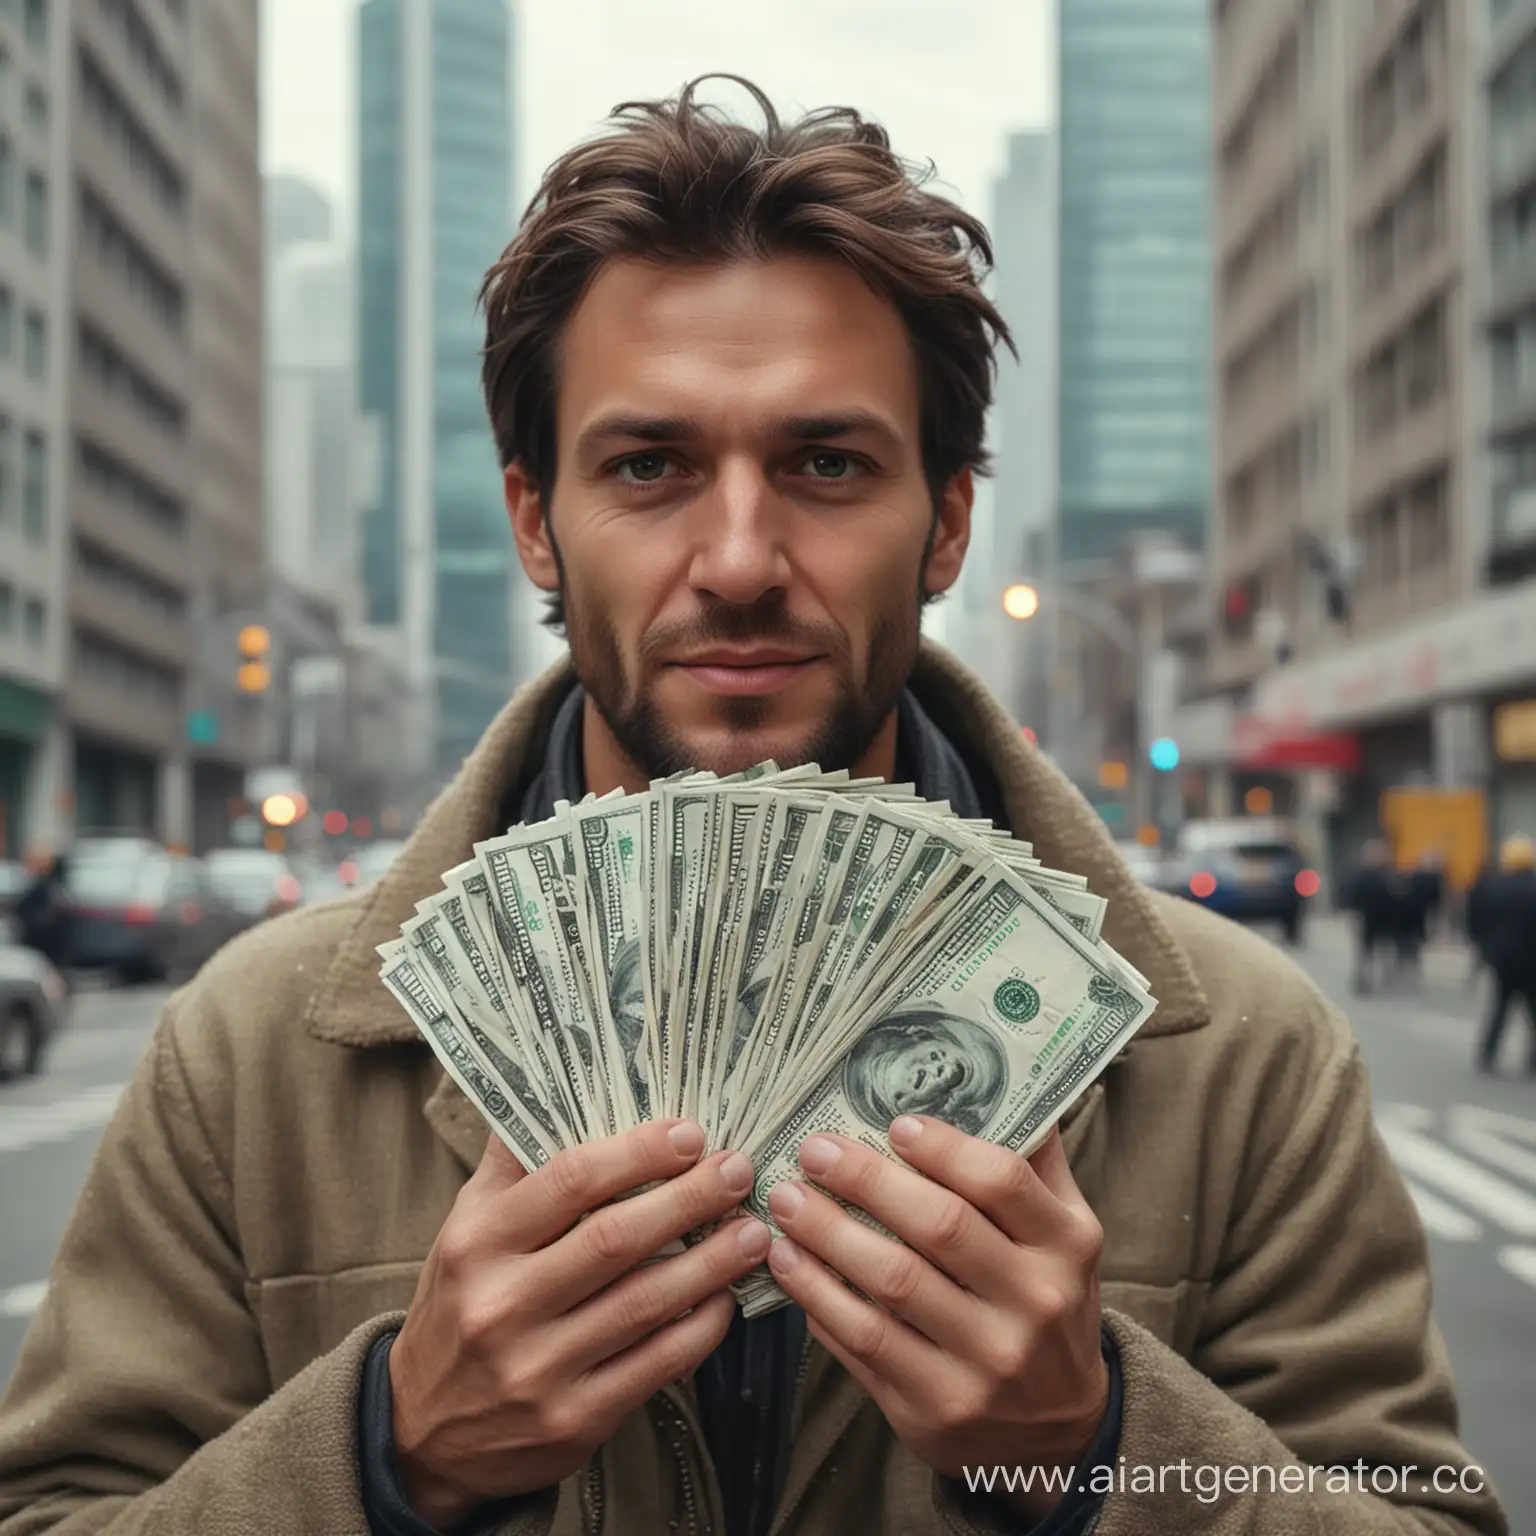 4k, 50 mm focal lengt, art, the crazy, kind face of a man holding clenched bundles of money in his hands, against the background of a blurred big city